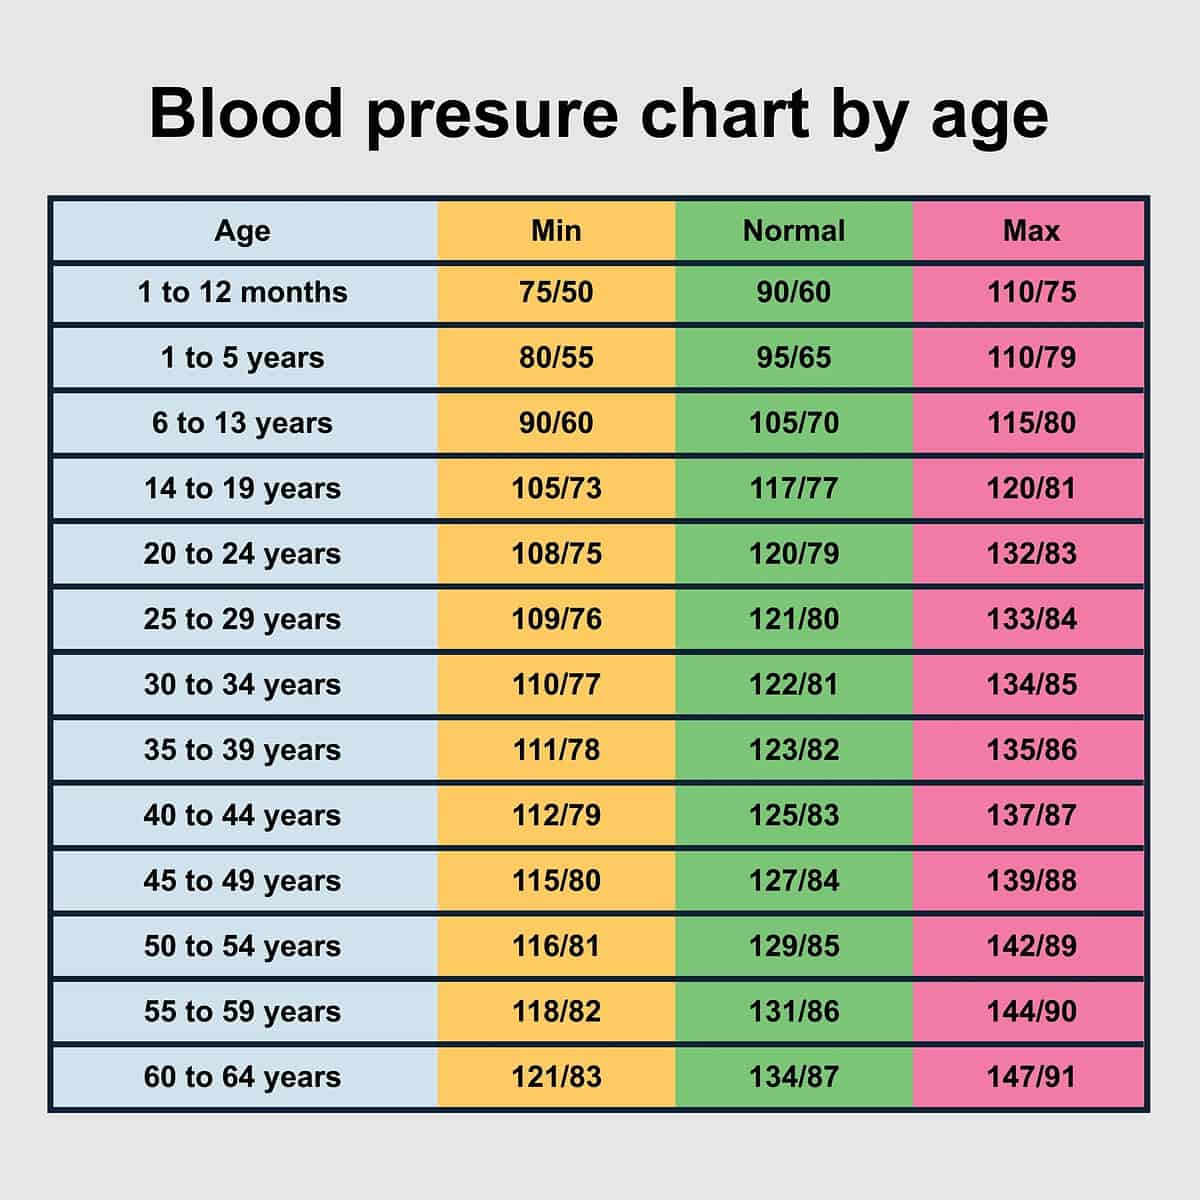 Blood pressure chart by age